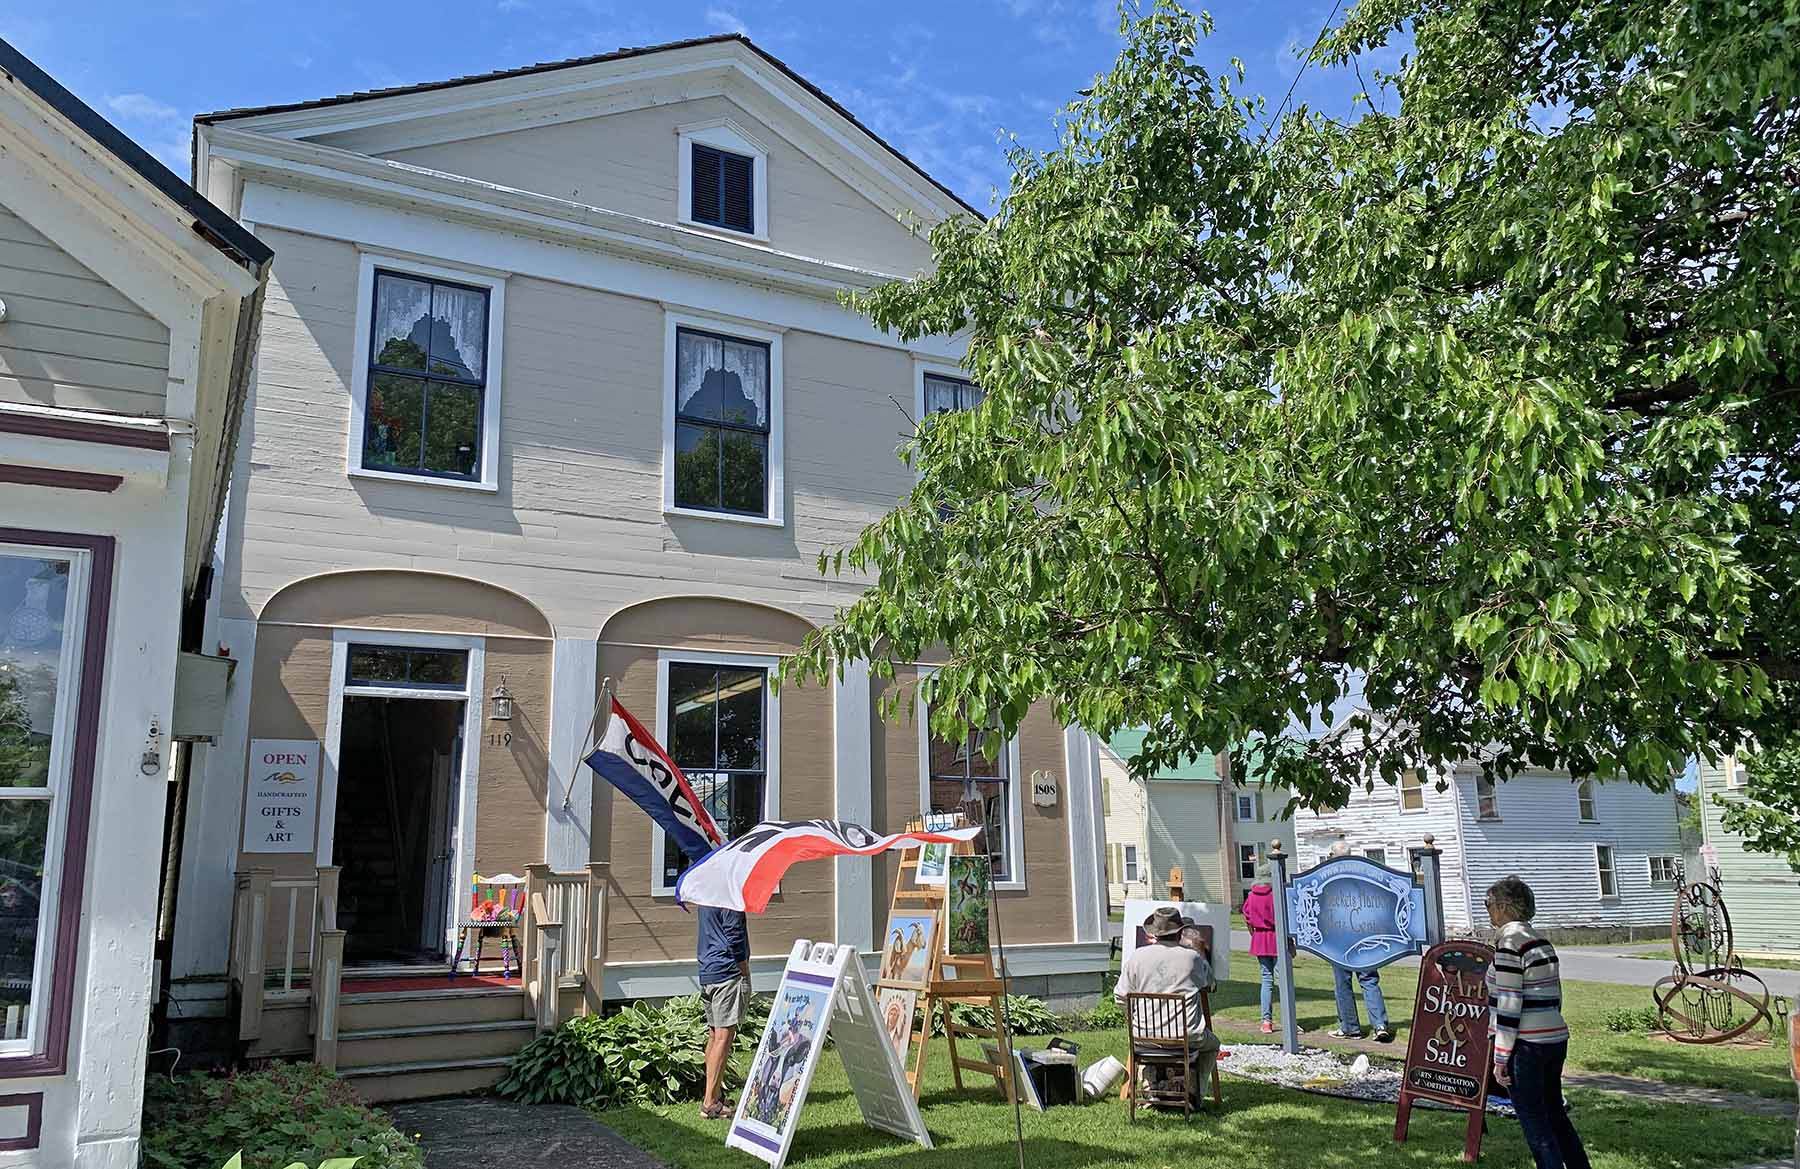 Photo of the Samuel F. Hooker House on a sunny day in 2022, taken by Kathy Keating. Since its restoration by the Sackets Harbor Historical Society, the building has been used as the gallery for the Arts Association of Northern New York (AANNY)